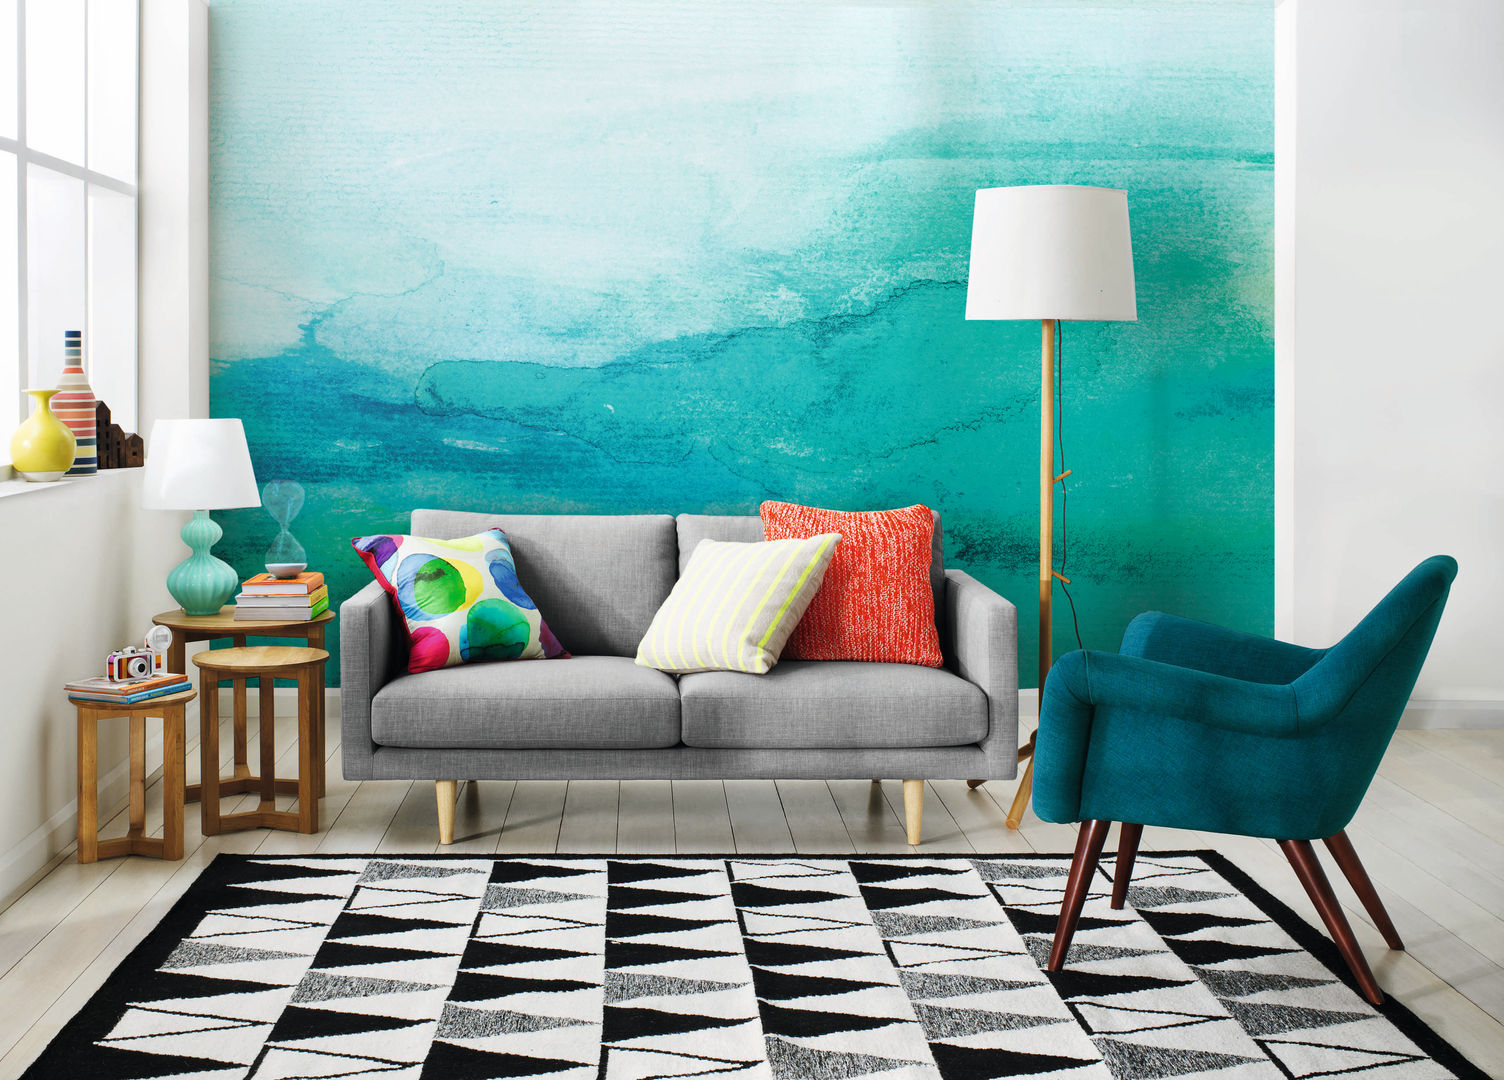 Ombre Pixers Salon scandinave Turquoise ombre,wall mural,watercolor,blue,wallpaper